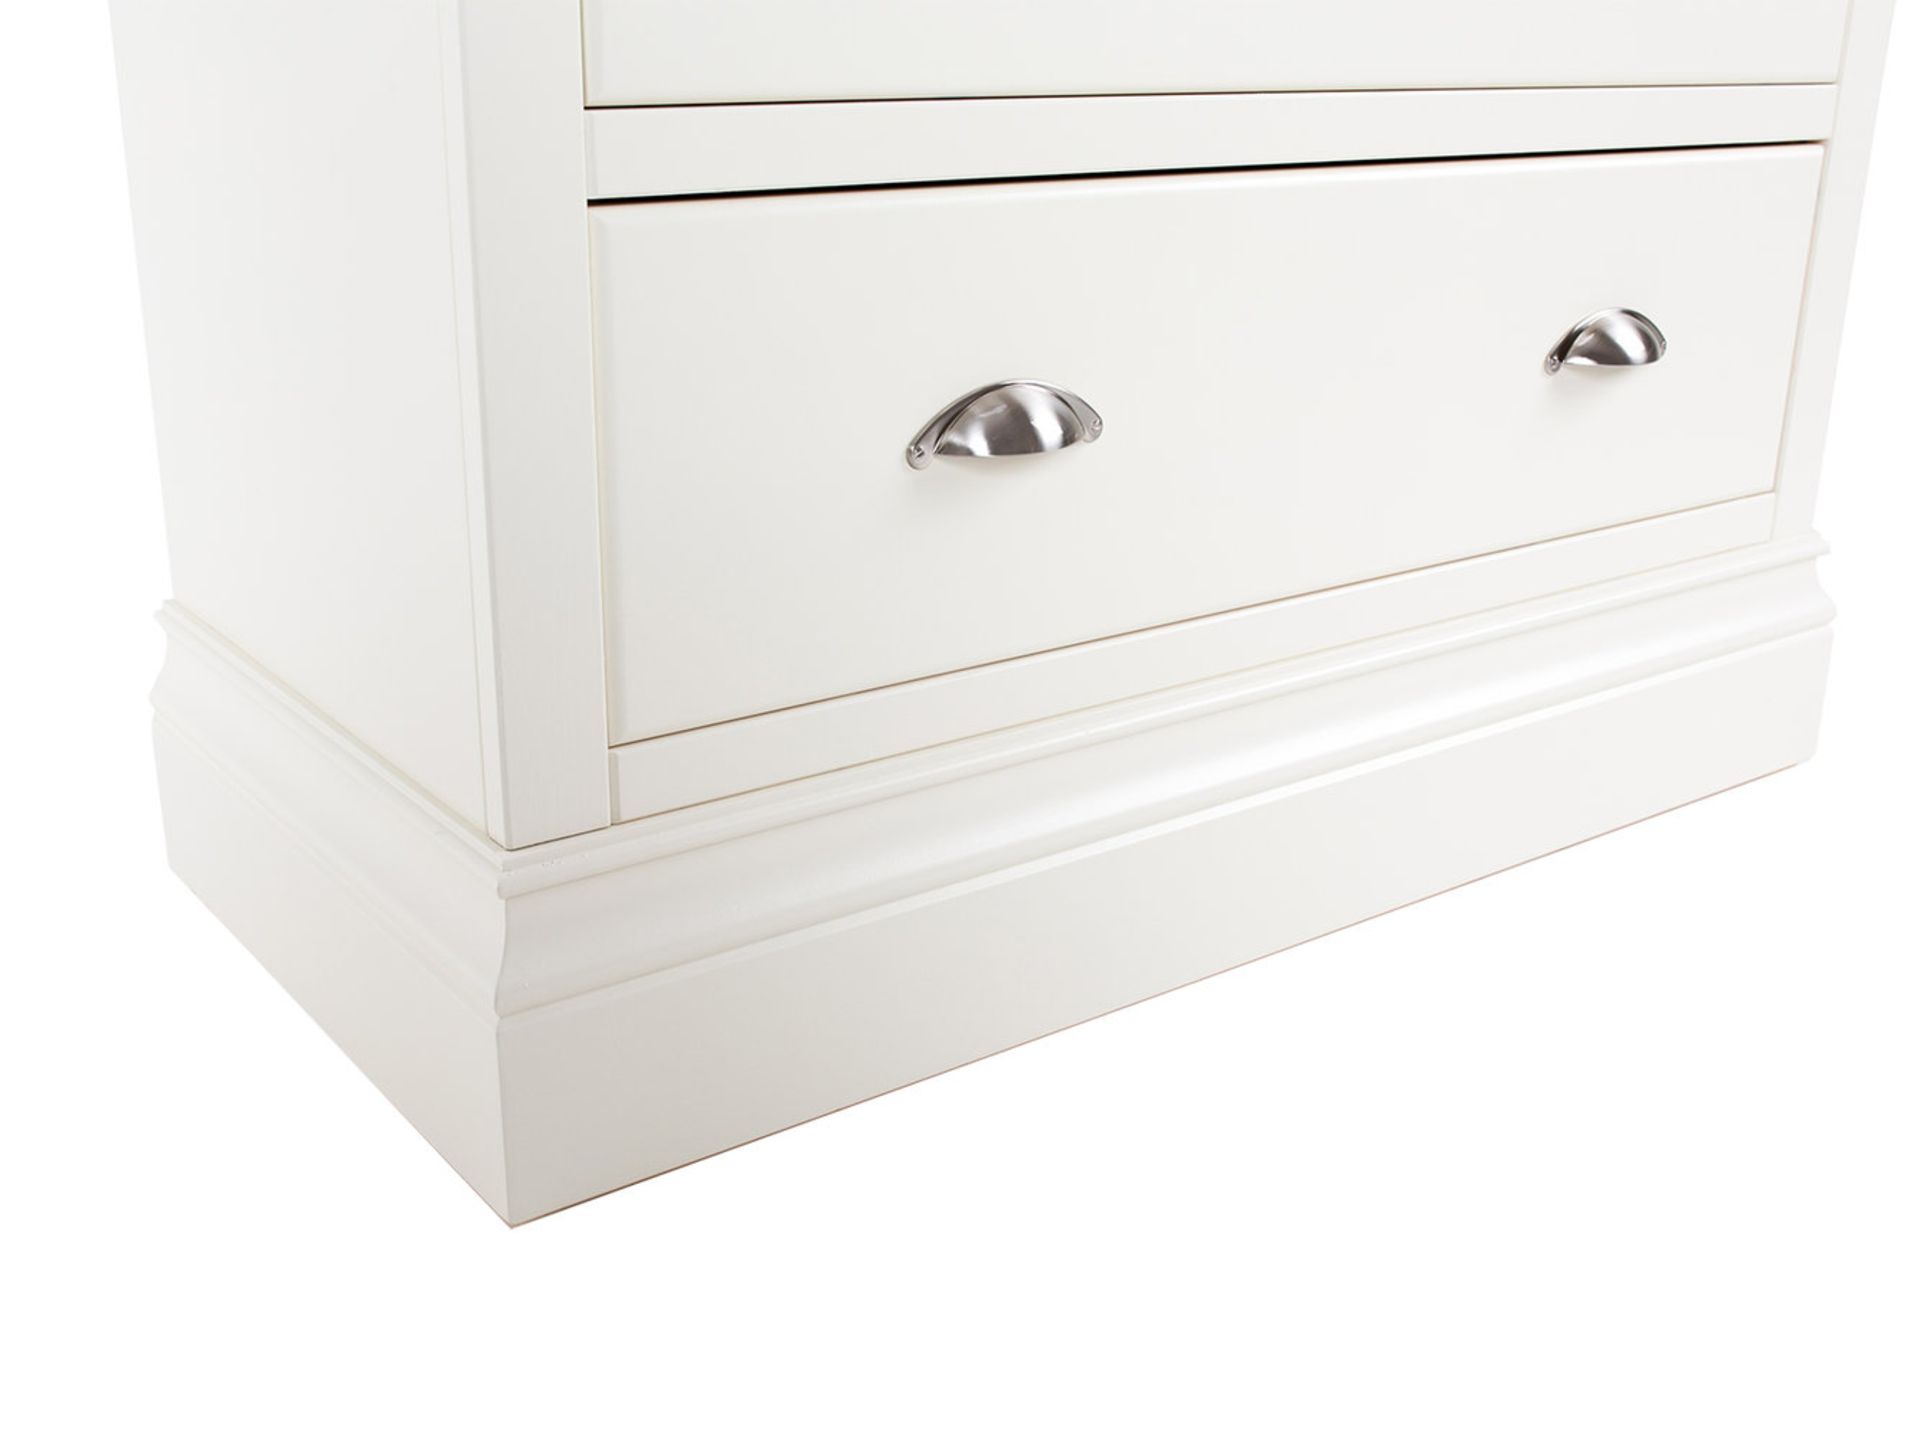 1 x Clement 3+2 Chest of Bedroom Drawers By Brewers Home - Solid Wood Painted Furniture Finished - Image 6 of 6